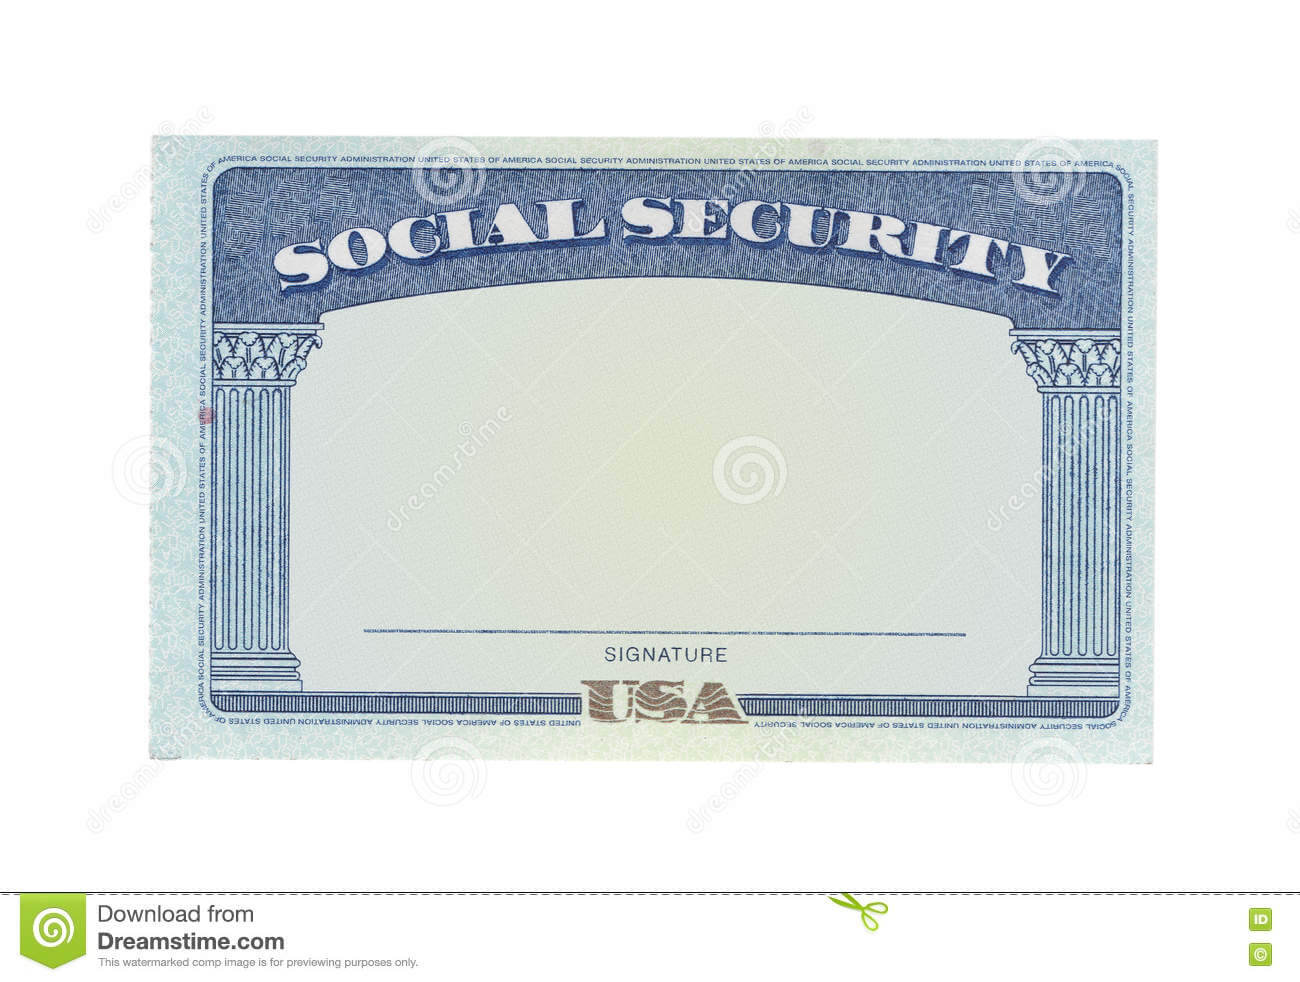 Blank Social Security Card Template Download - Great With Regard To Blank Social Security Card Template Download